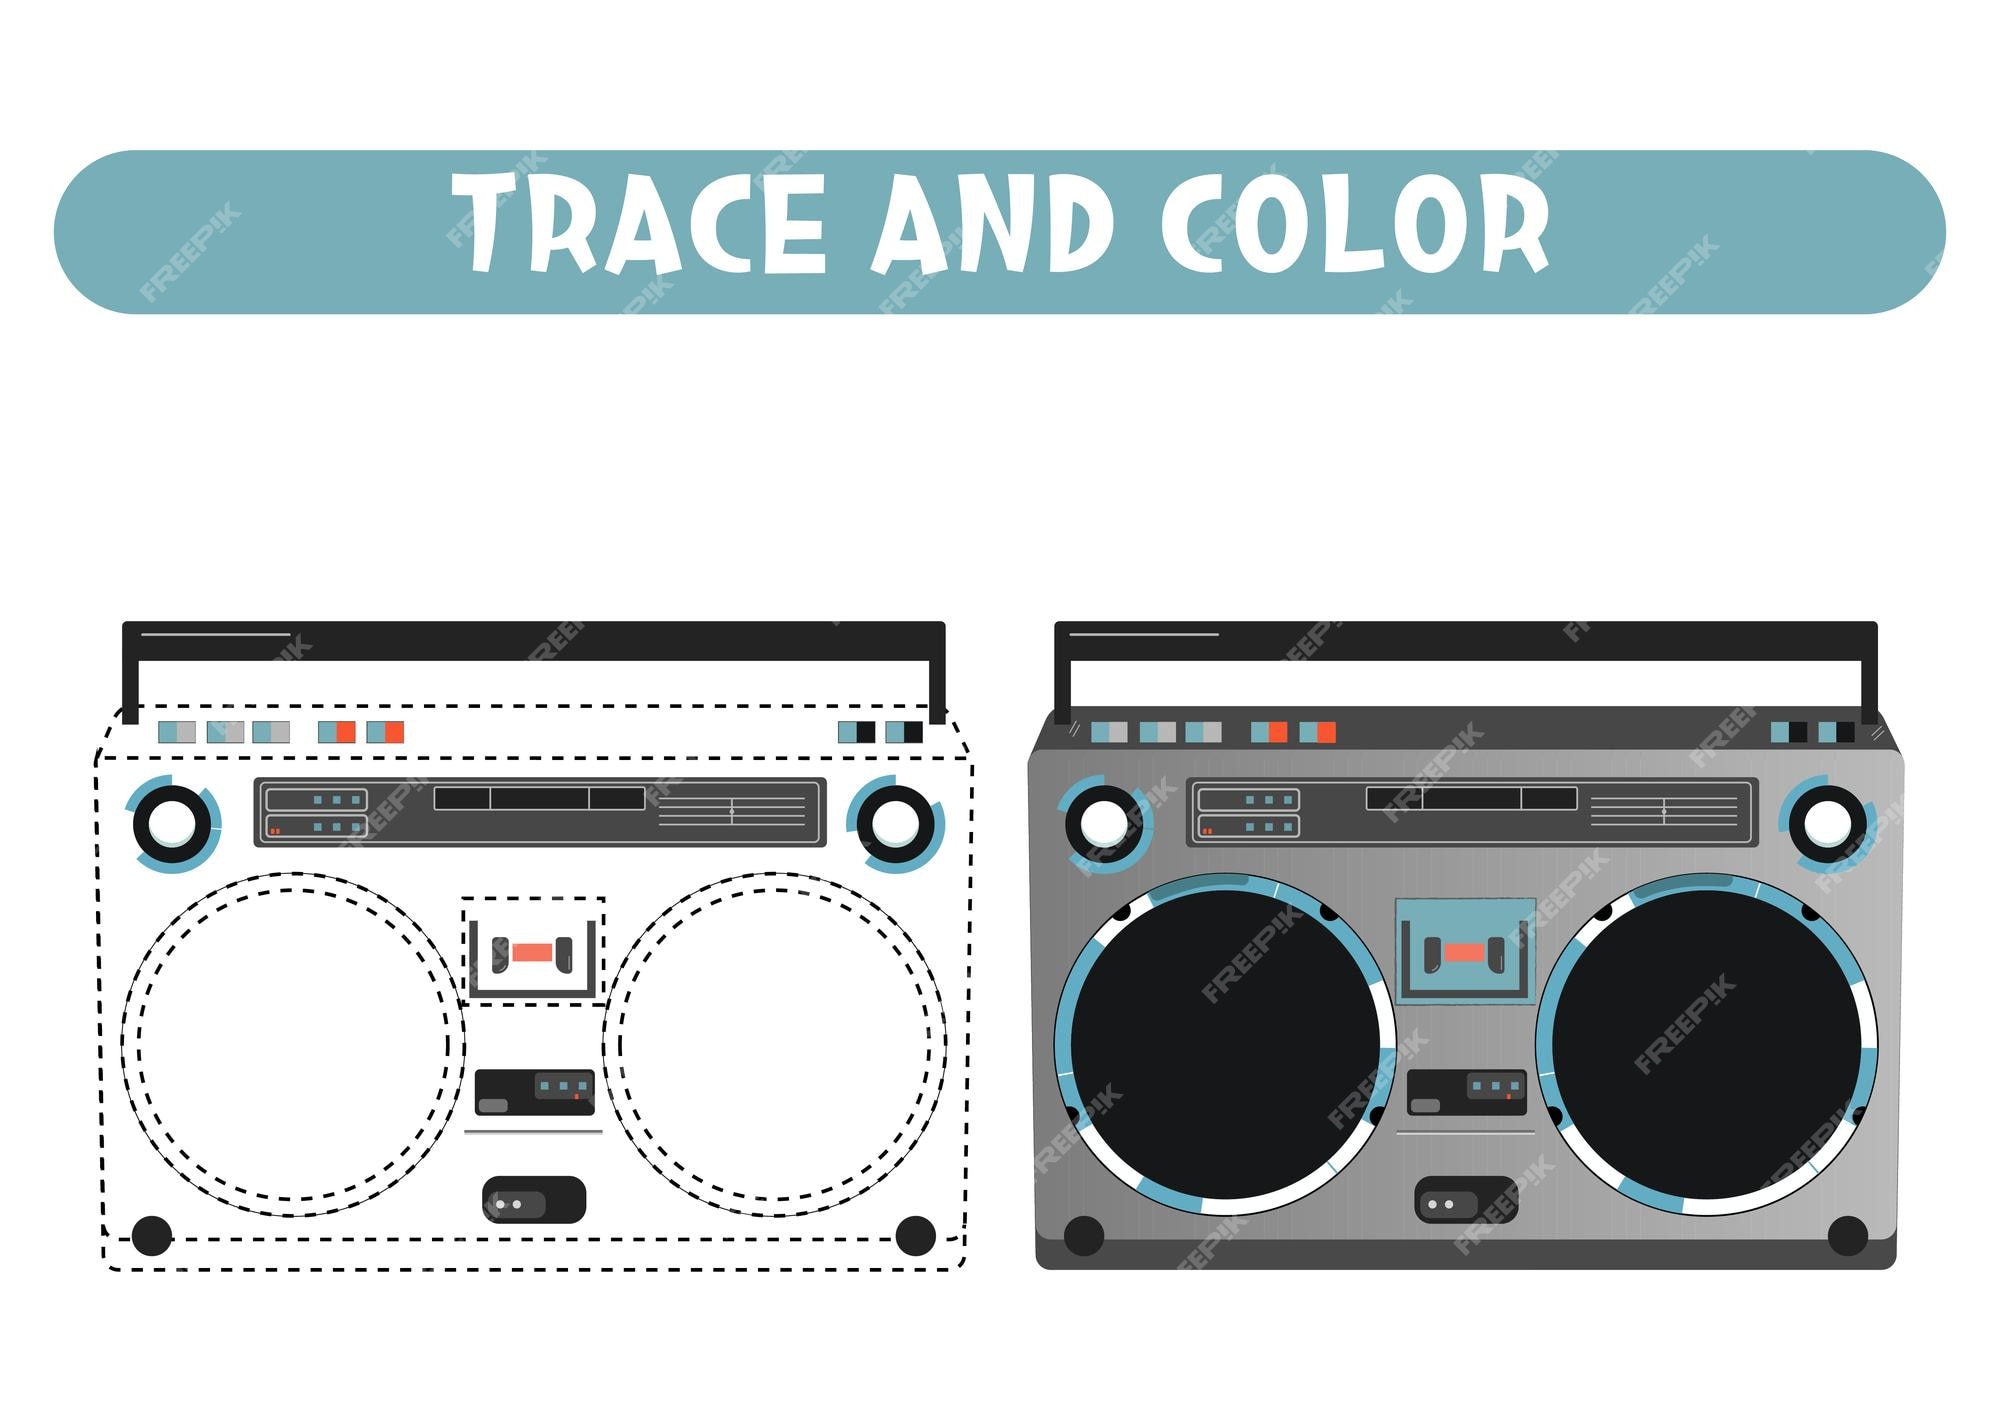 Premium vector trace and color retro boombox radio worksheet for kids